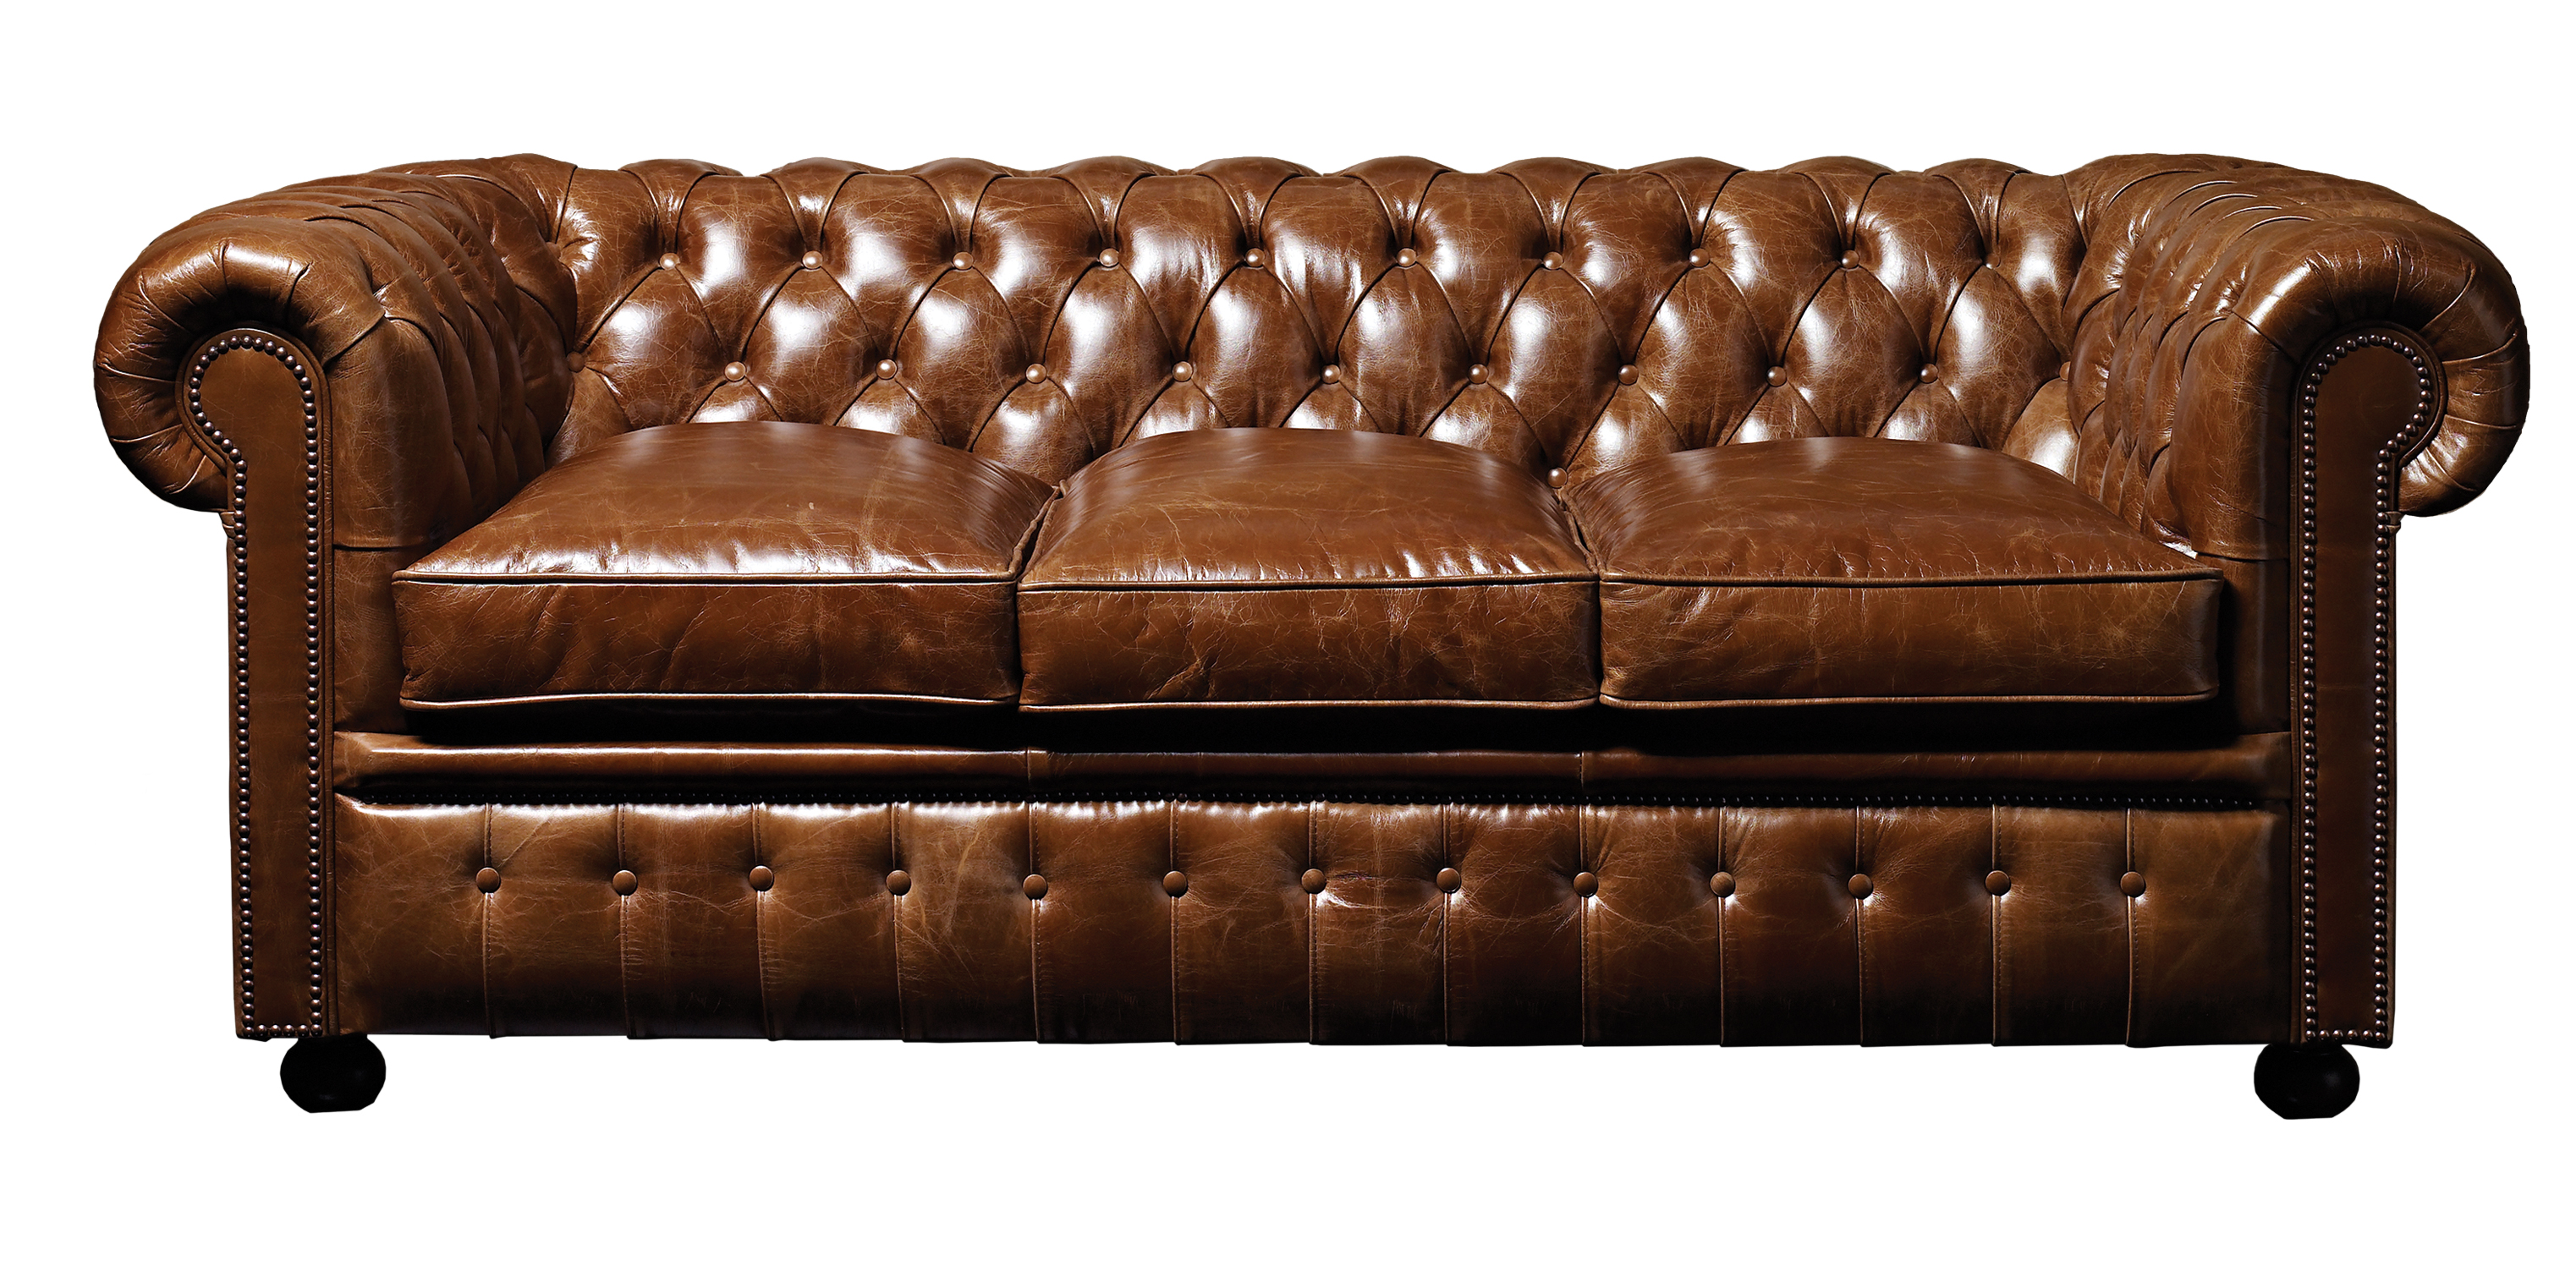 Design Classics 20 The Chesterfield Sofa Mad About The House